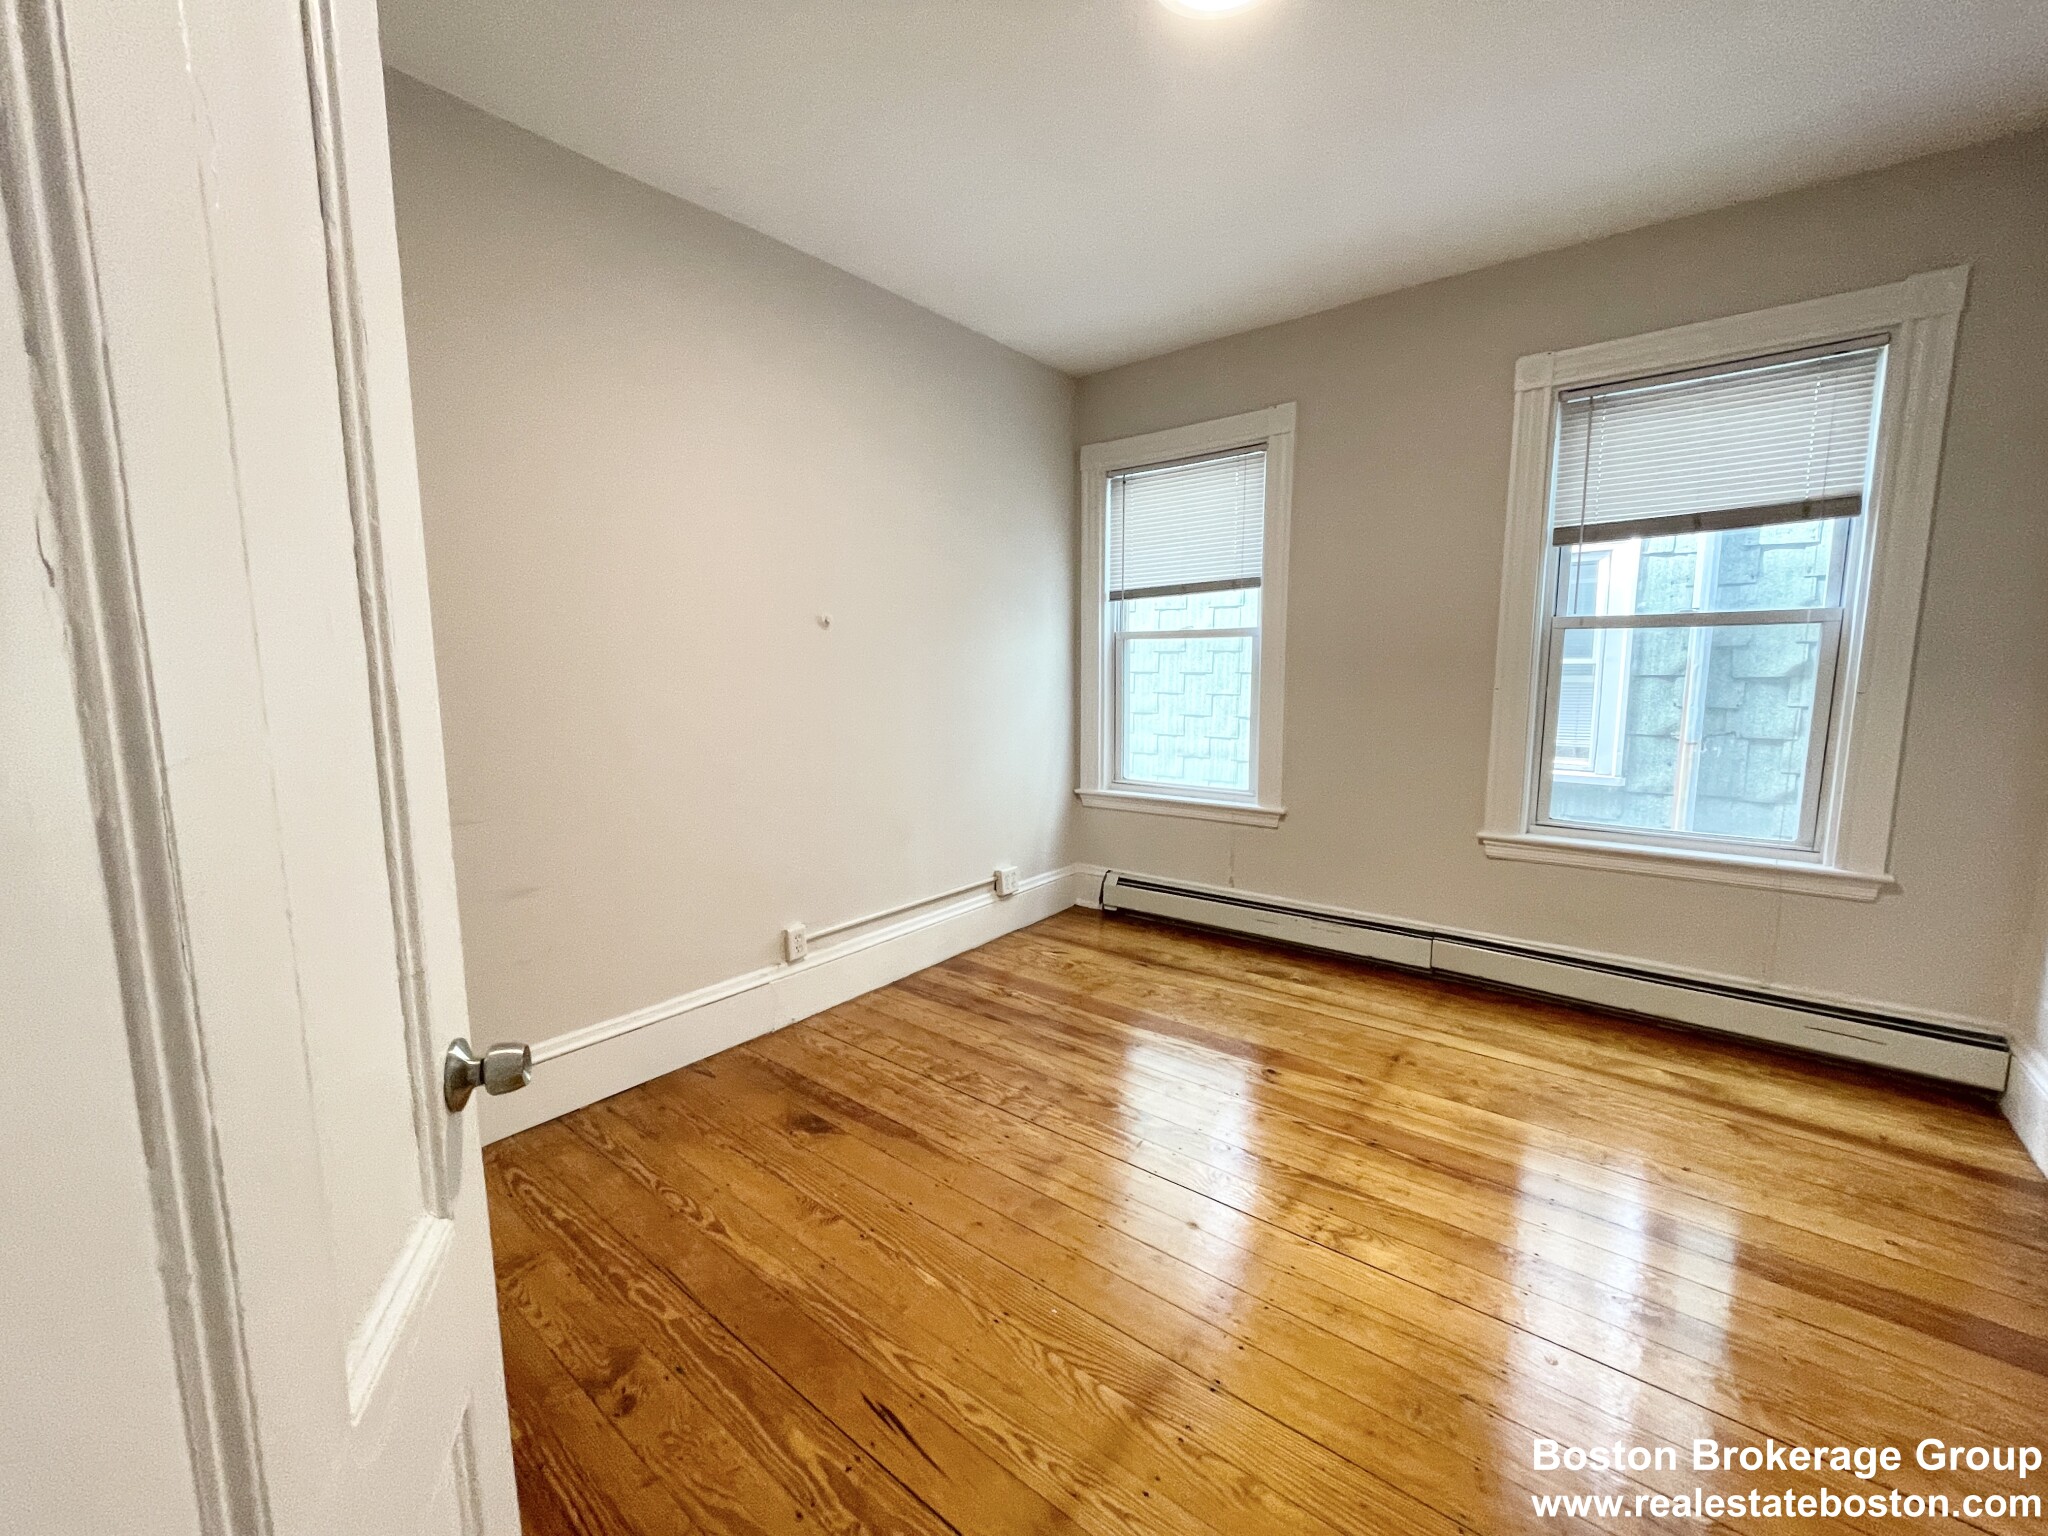 Photos of apartment on East Cottage,Boston MA 02125